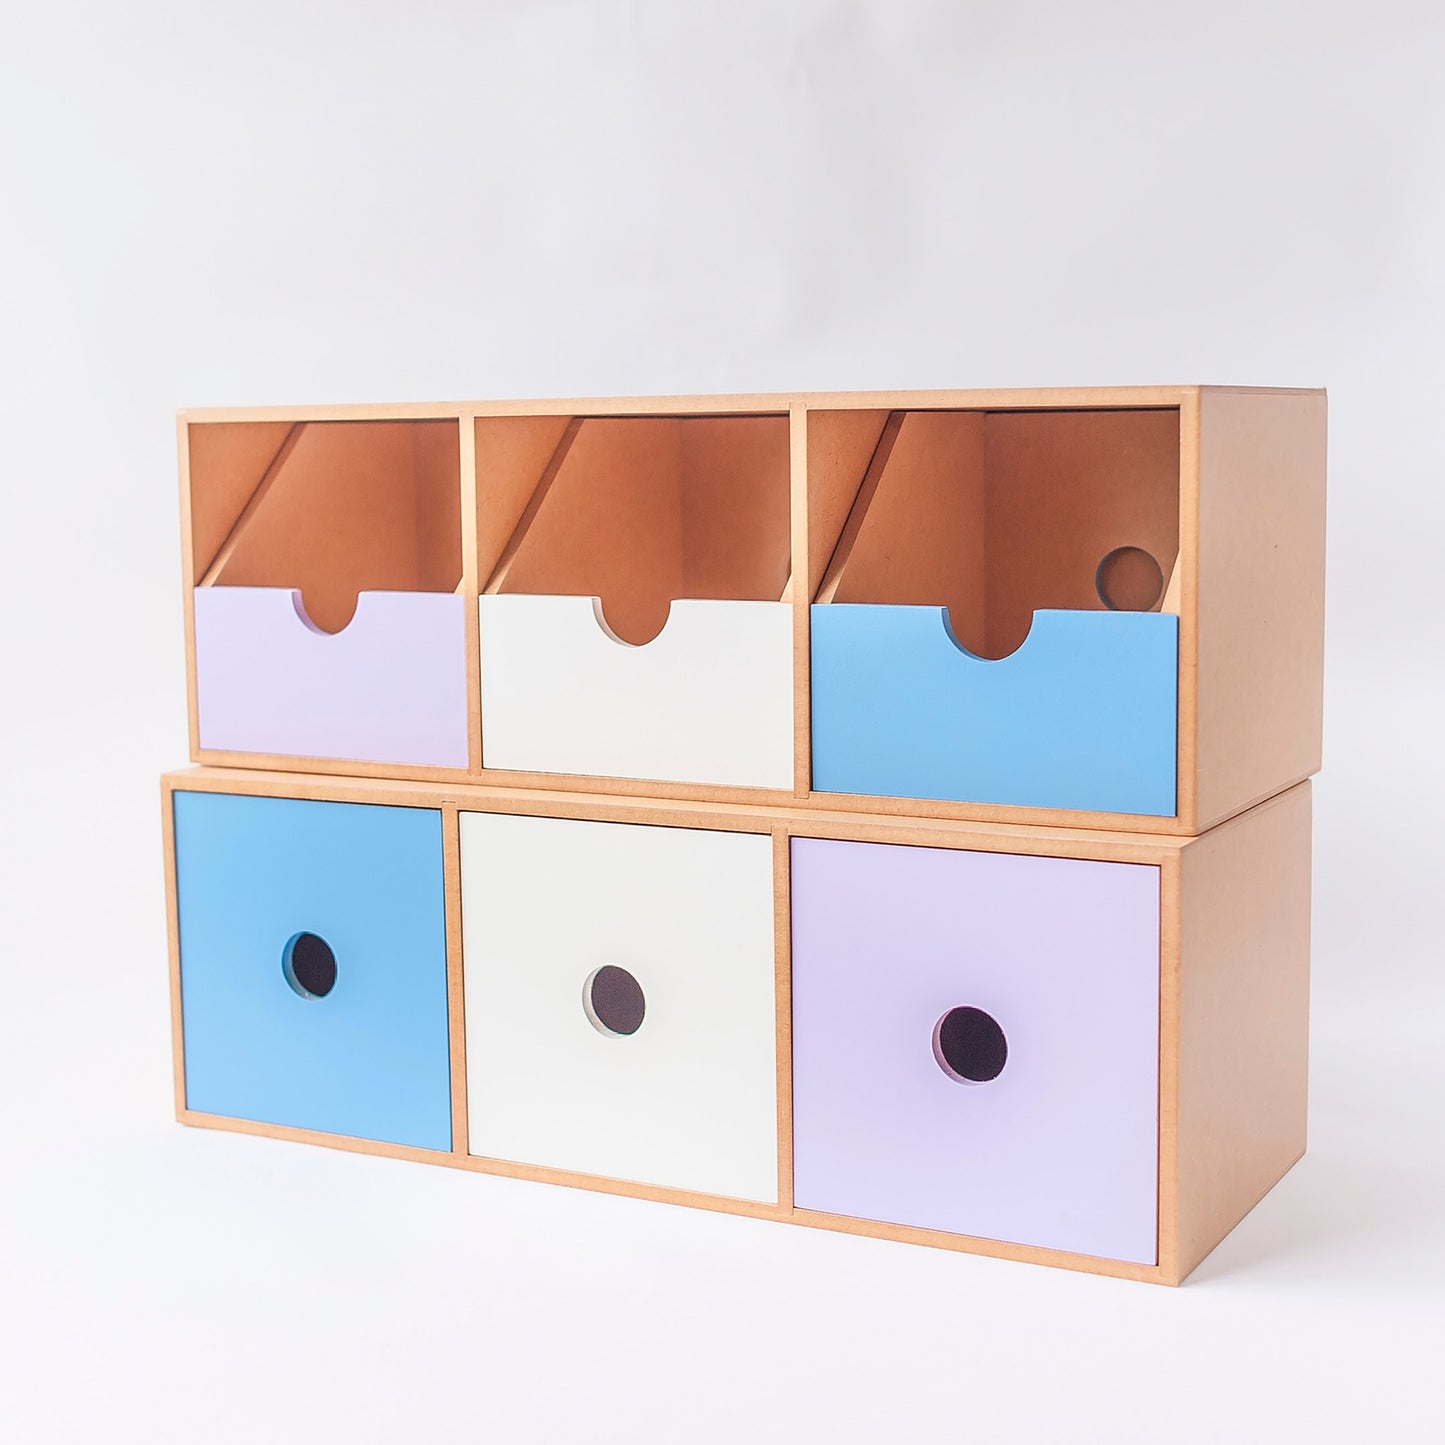 Mifo Wood Art 3-Compartment Horizontal/Vertical Stationery Box (FOR METRO MANILA & RIZAL* Shipping Only)